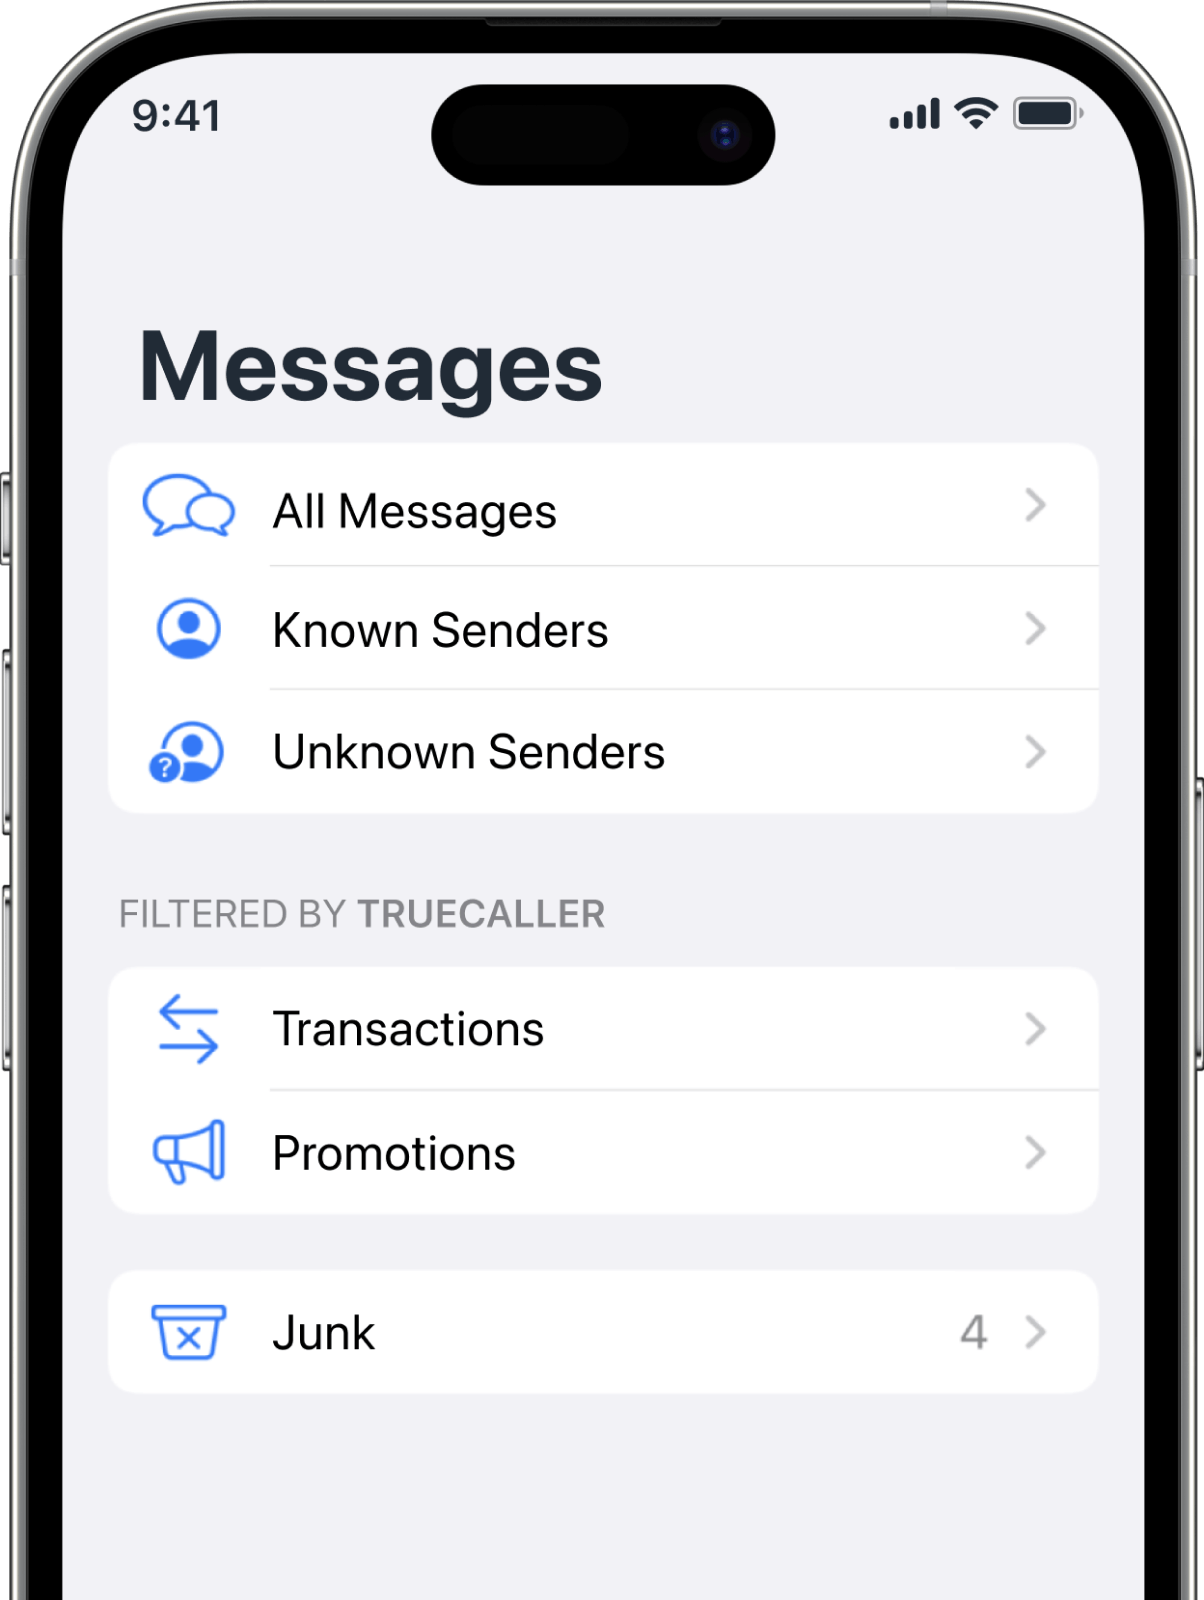 Messages in Truecaller for iOS